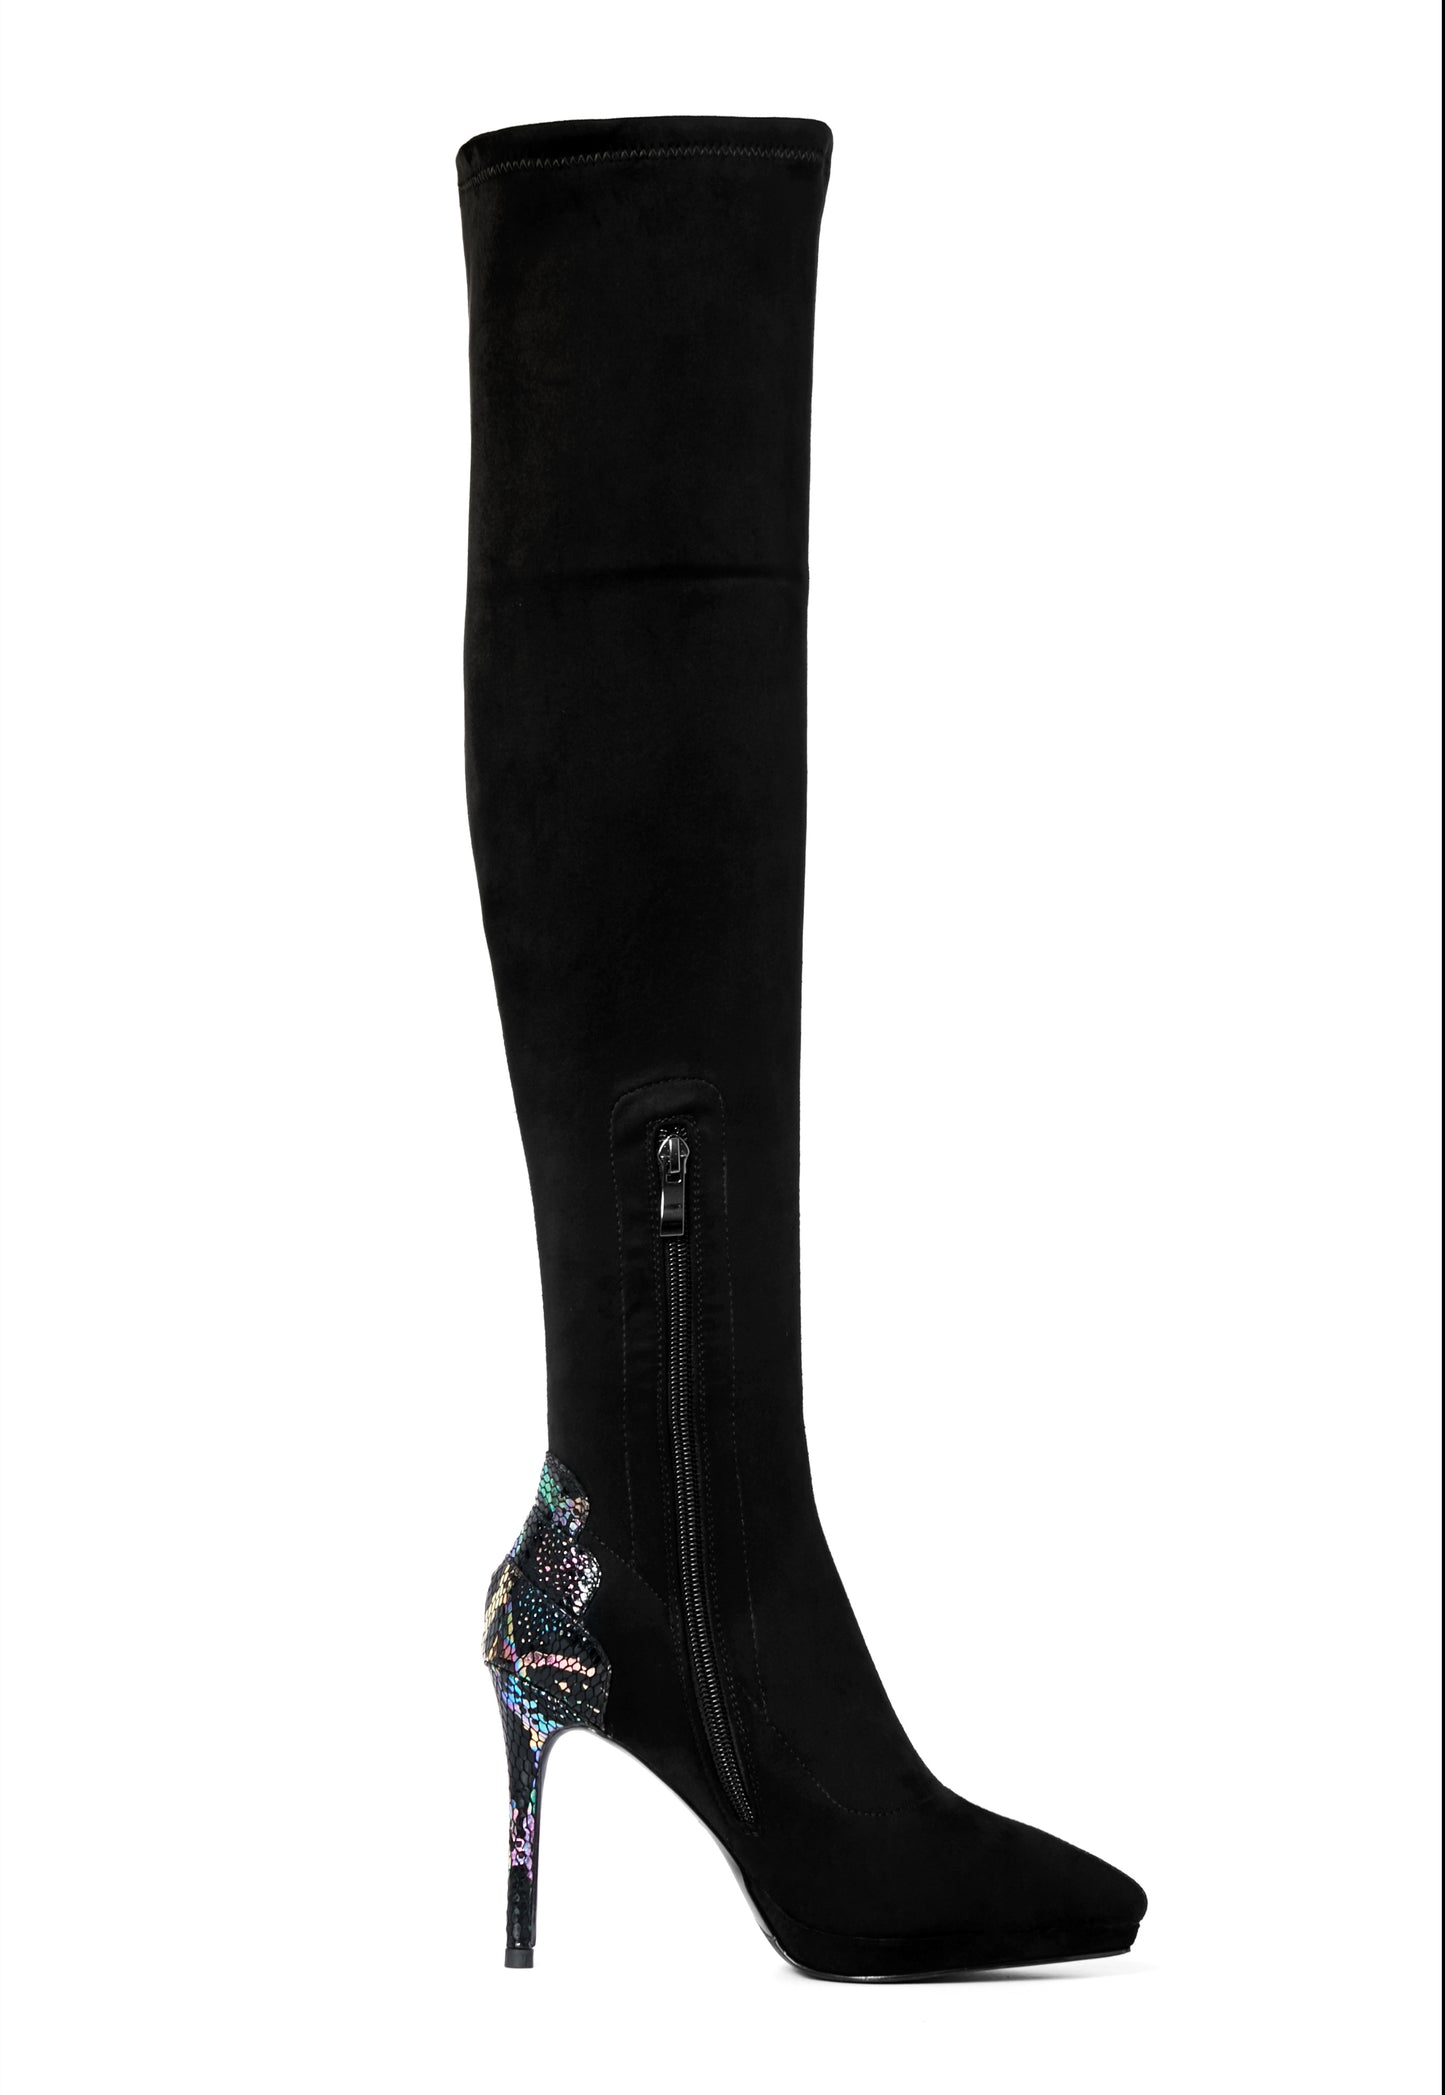 TinaCus Women's Handmade Suede Leather Pointed Toe Sexy Stiletto High Heel Stretch Half Zip Black Over the Knee High Boots with Colorful Sequin